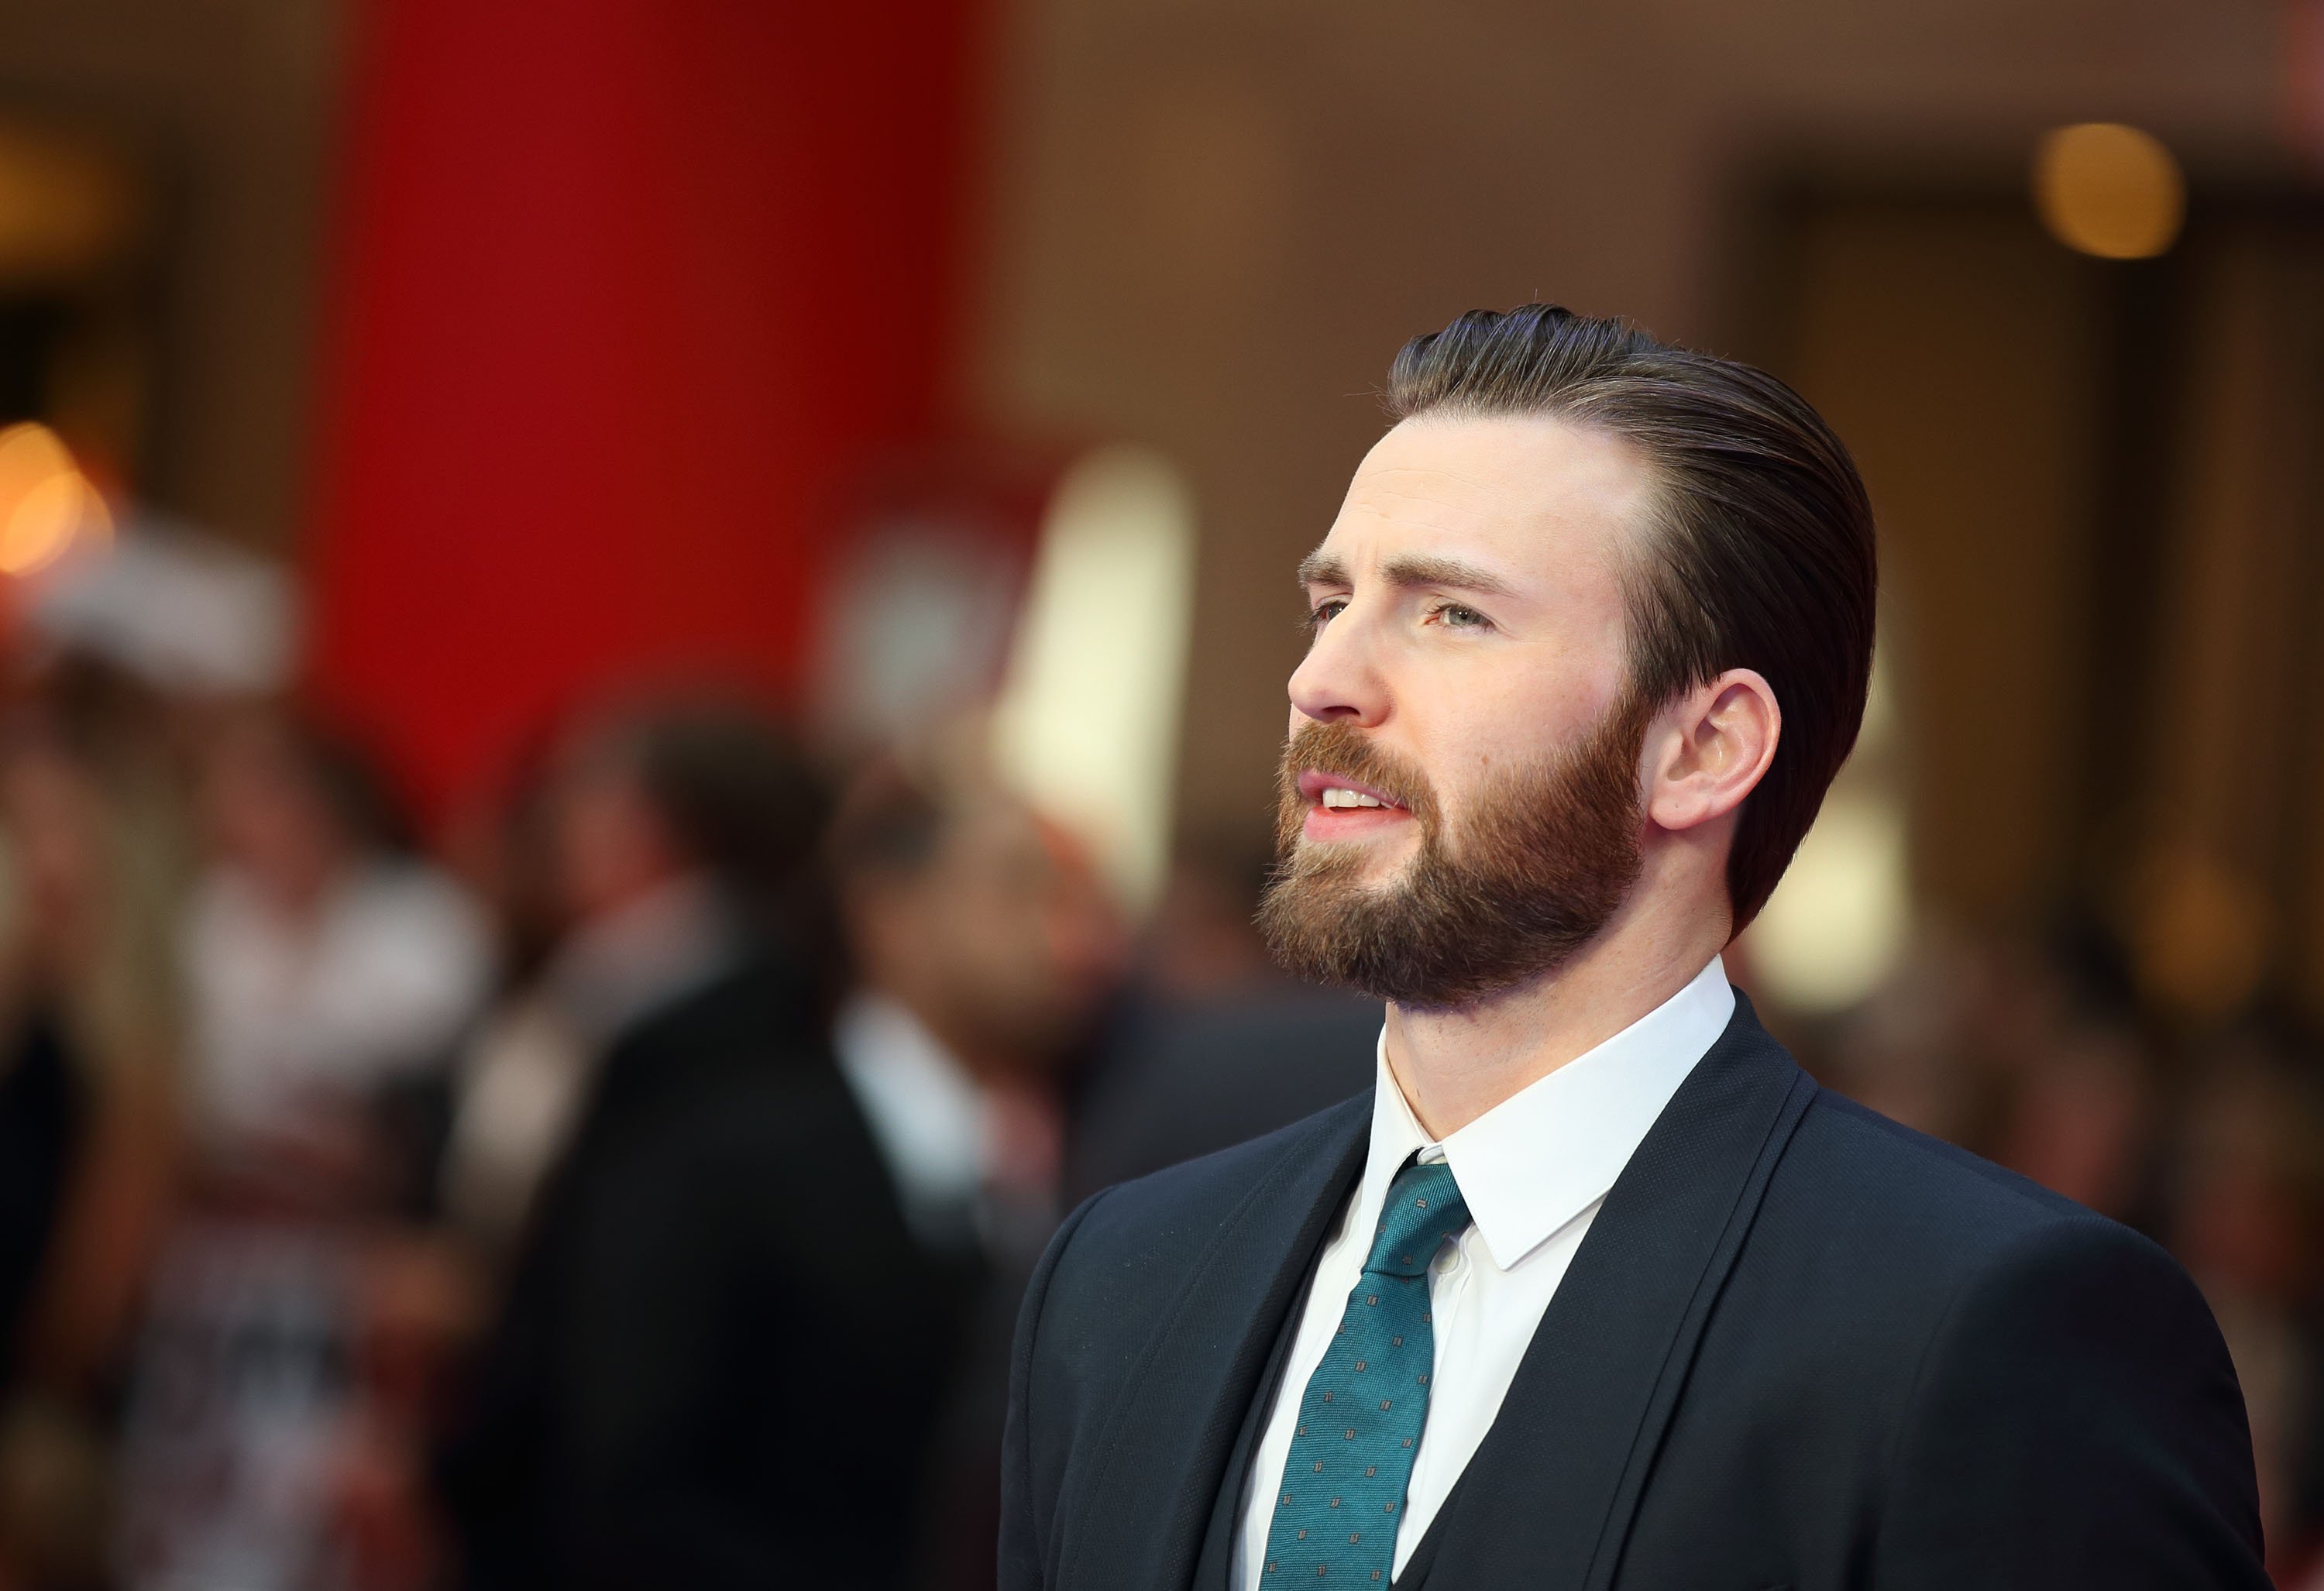 Captain America actor Chris Evans wearing a suit and posing at a film premiere.